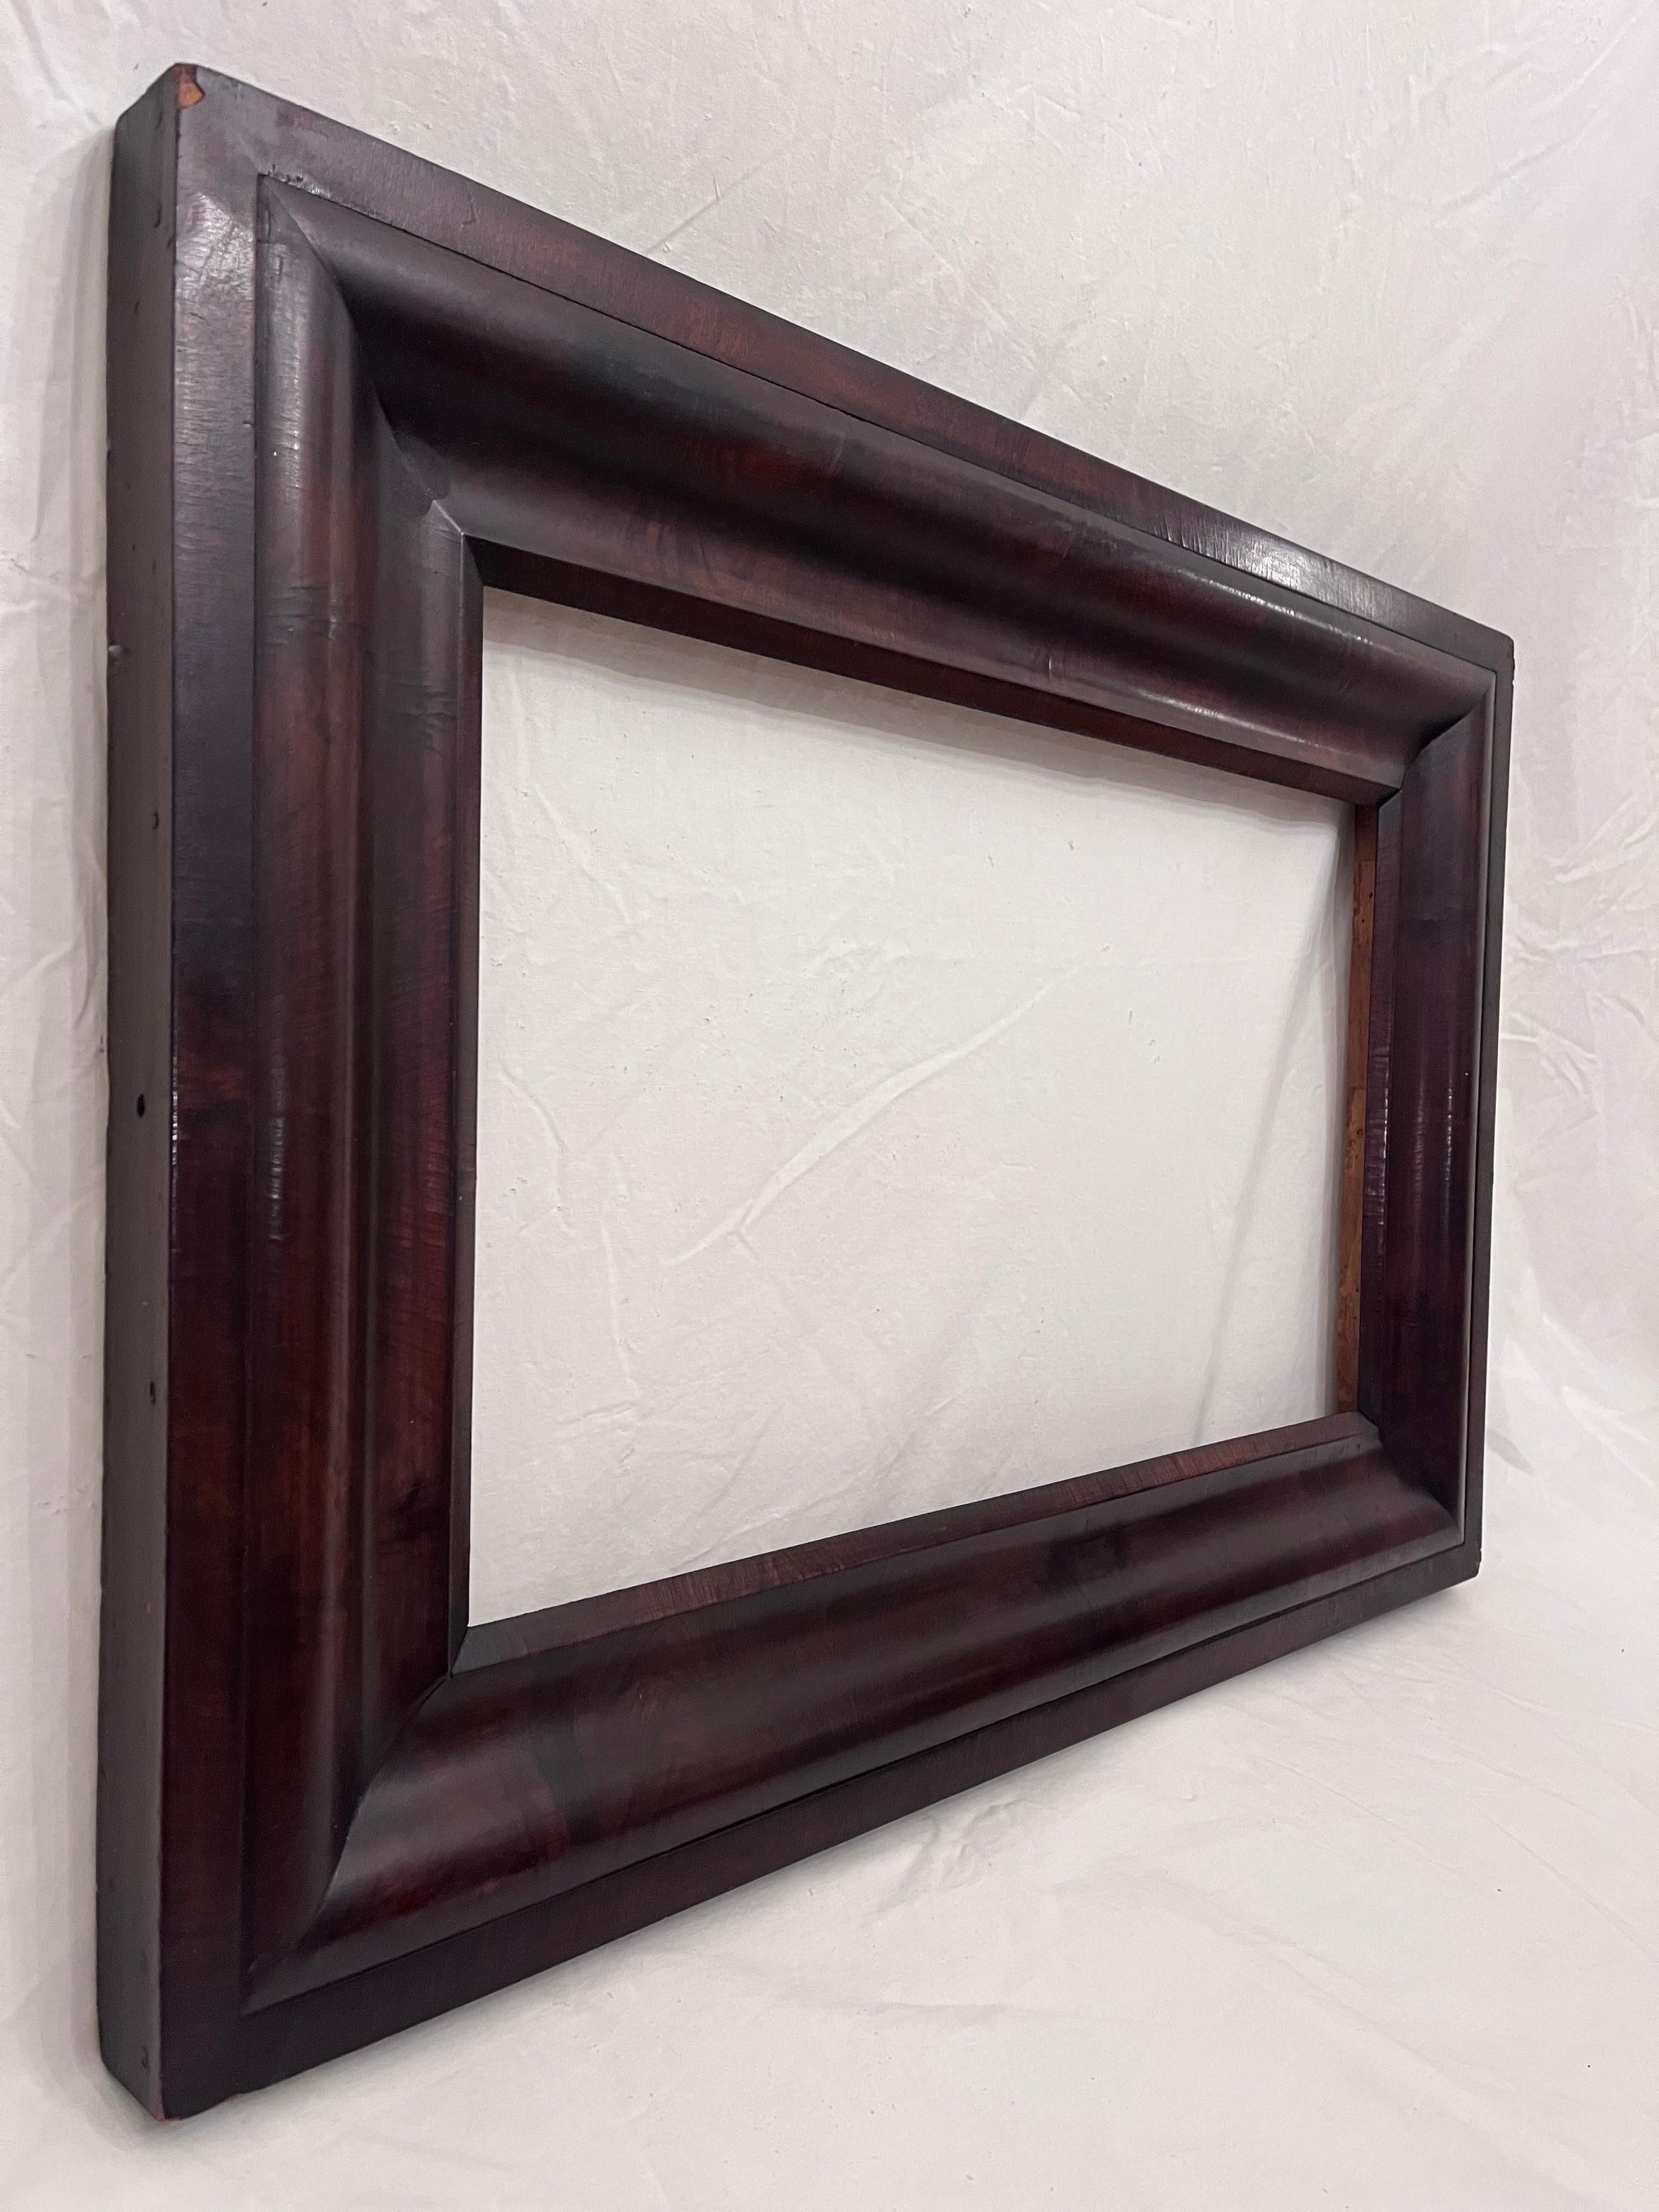 A beautiful and antique late 19th century circa 1870's American Empire style picture frame. The rabbet size (size that holds the art) is 22.25